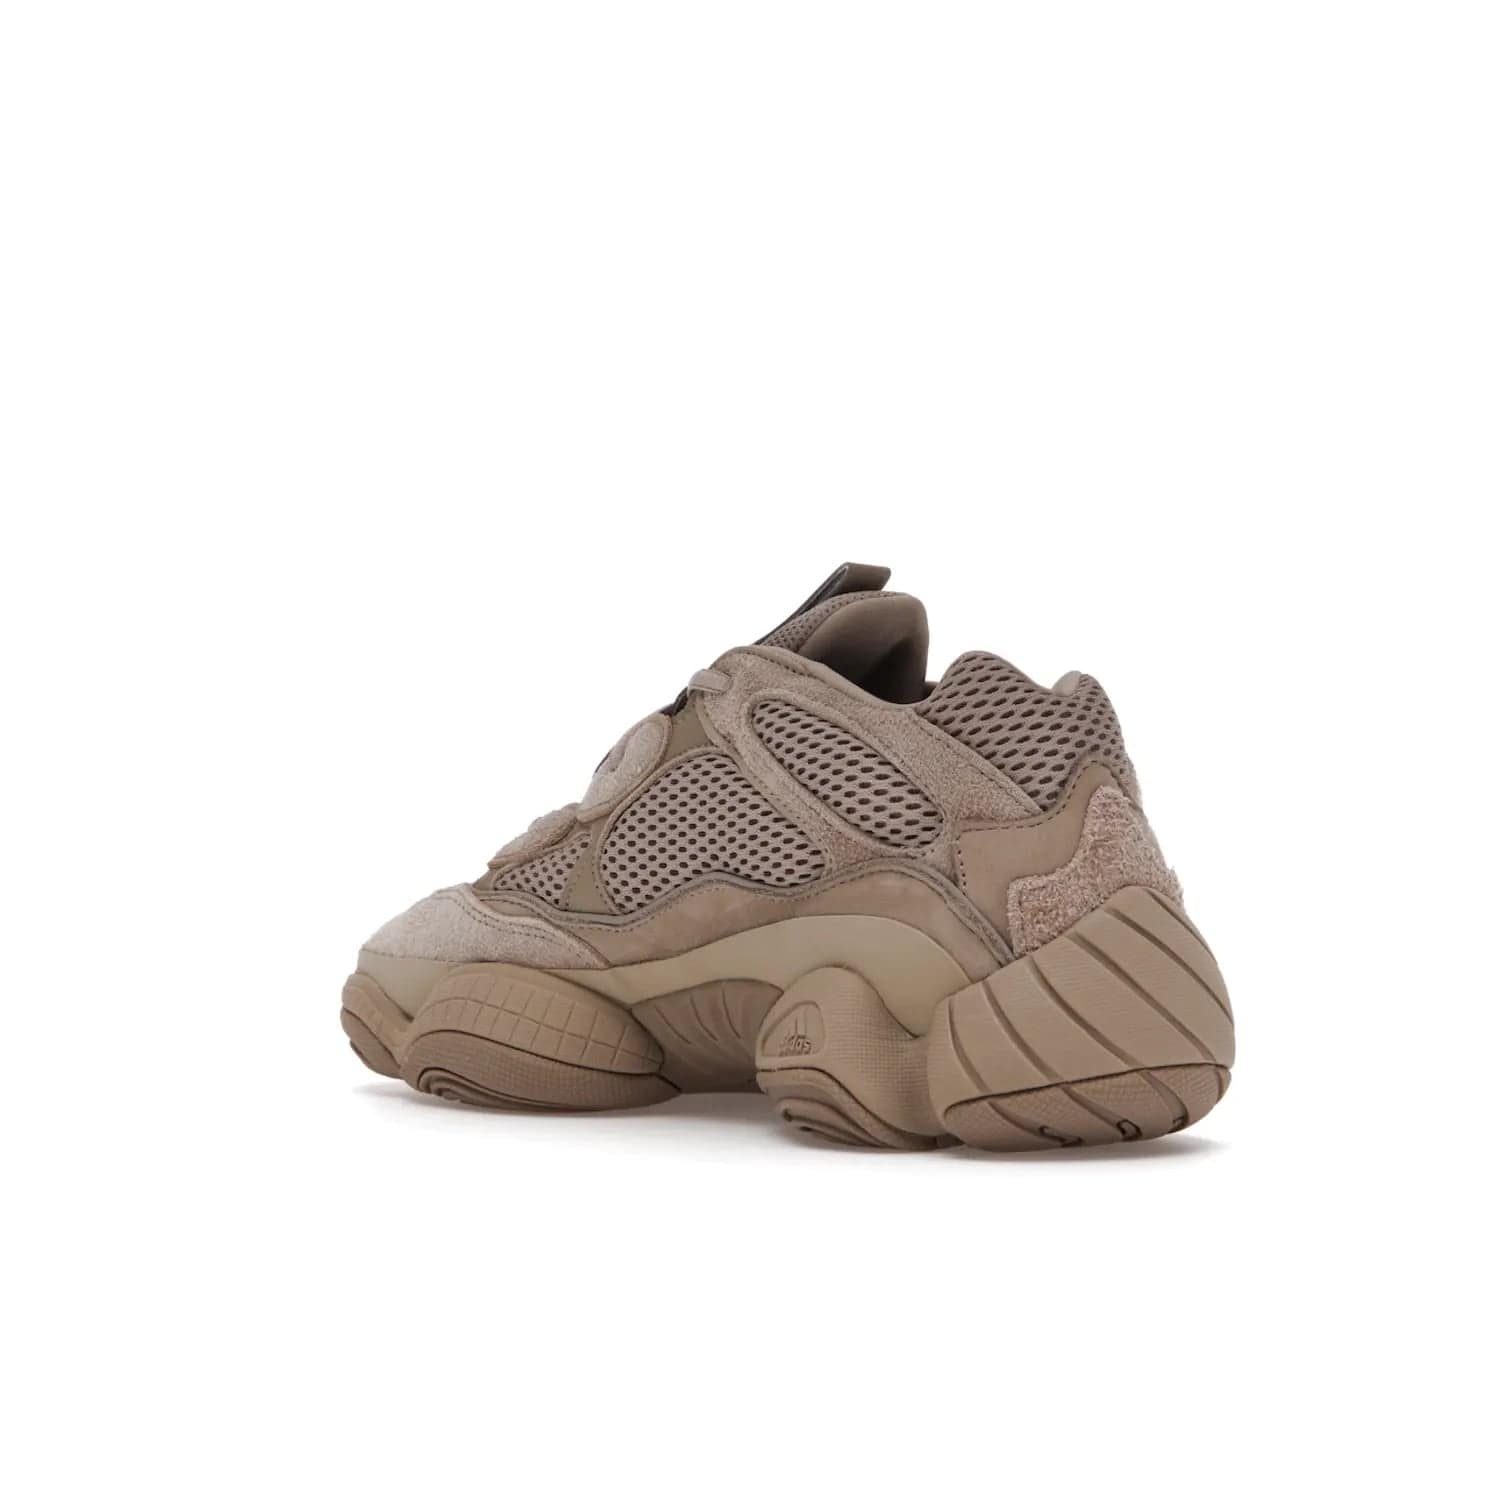 adidas Yeezy 500 Taupe Light - Image 24 - Only at www.BallersClubKickz.com - The adidas Yeezy 500 Taupe Light combines mesh, leather, and suede, with a durable adiPRENE sole for an eye-catching accessory. Reflective piping adds the perfect finishing touches to this unique silhouette. Ideal for any wardrobe, releasing in June 2021.